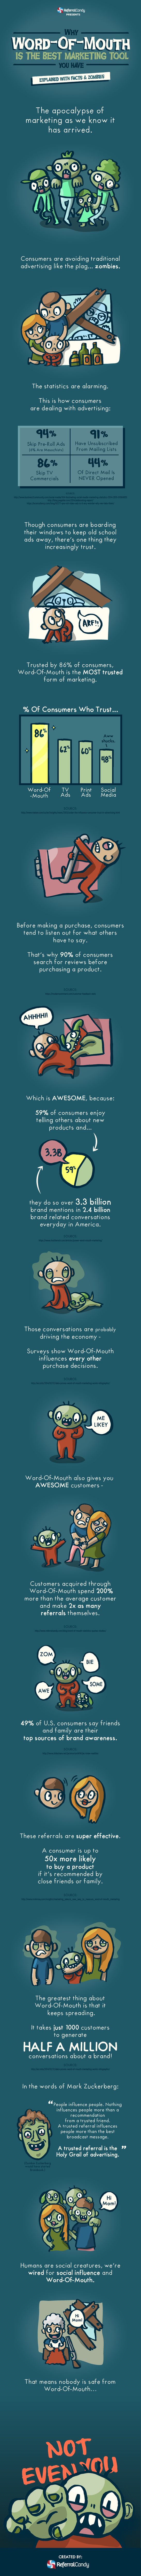 word-of-mouth-marketing-zombies.png